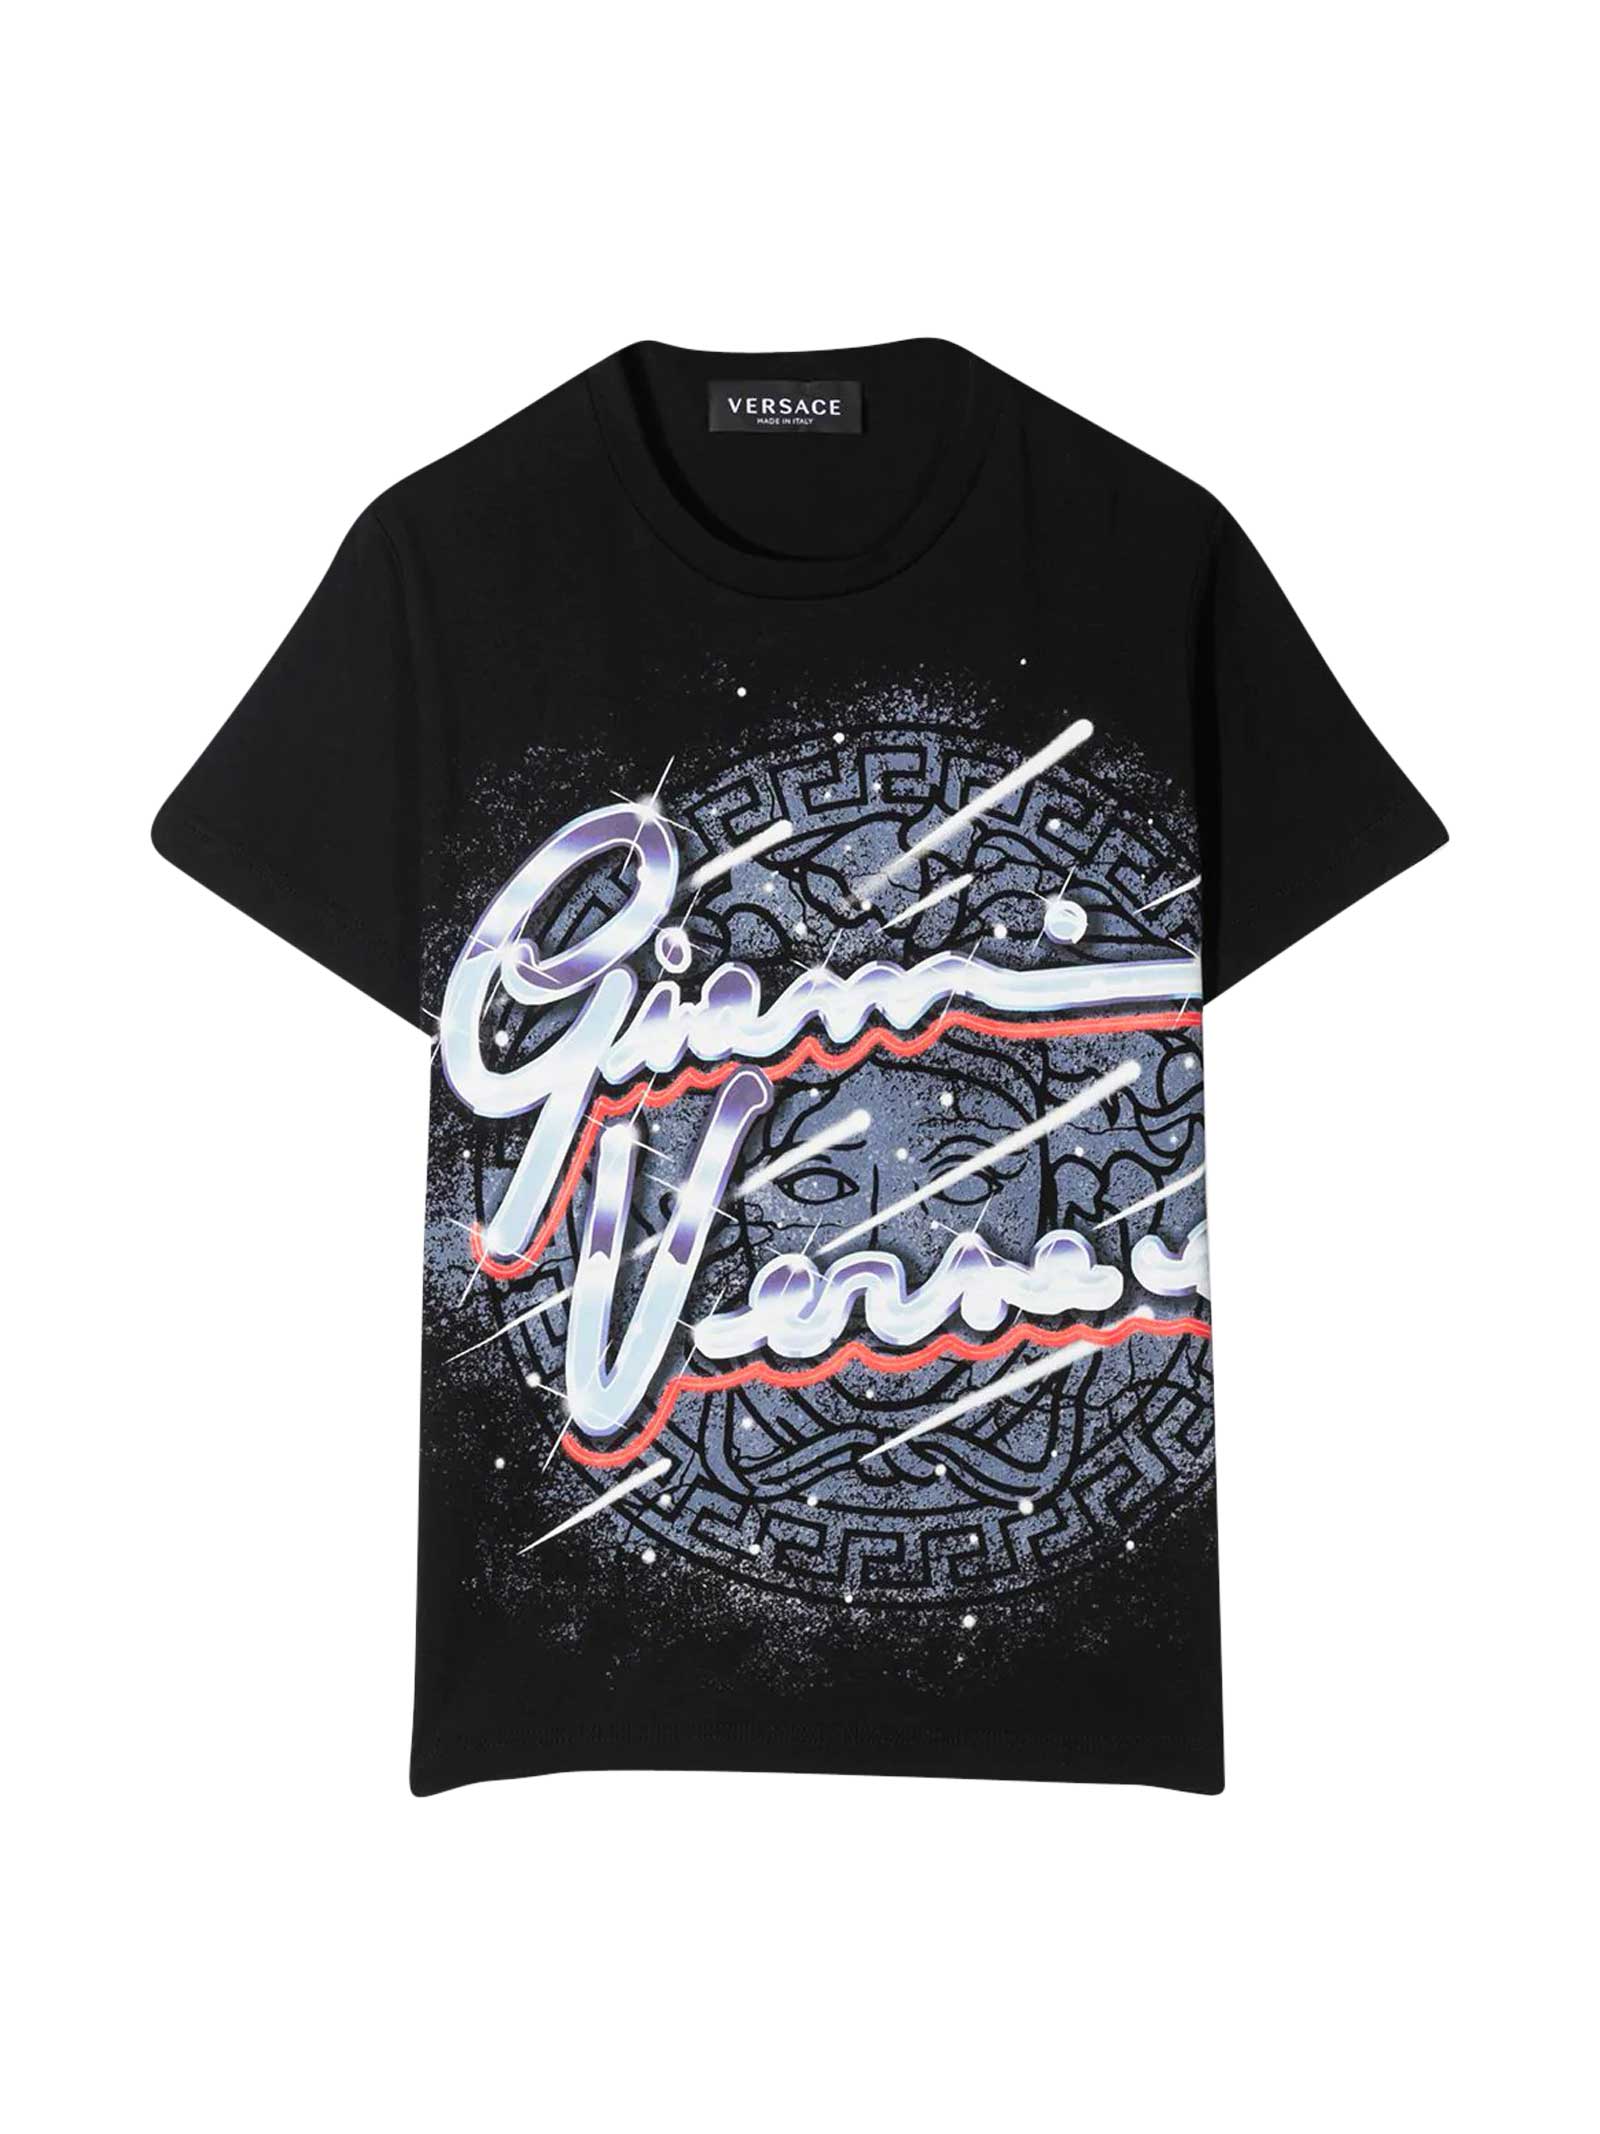 Versace Black T-shirt With Multicolor Print Young